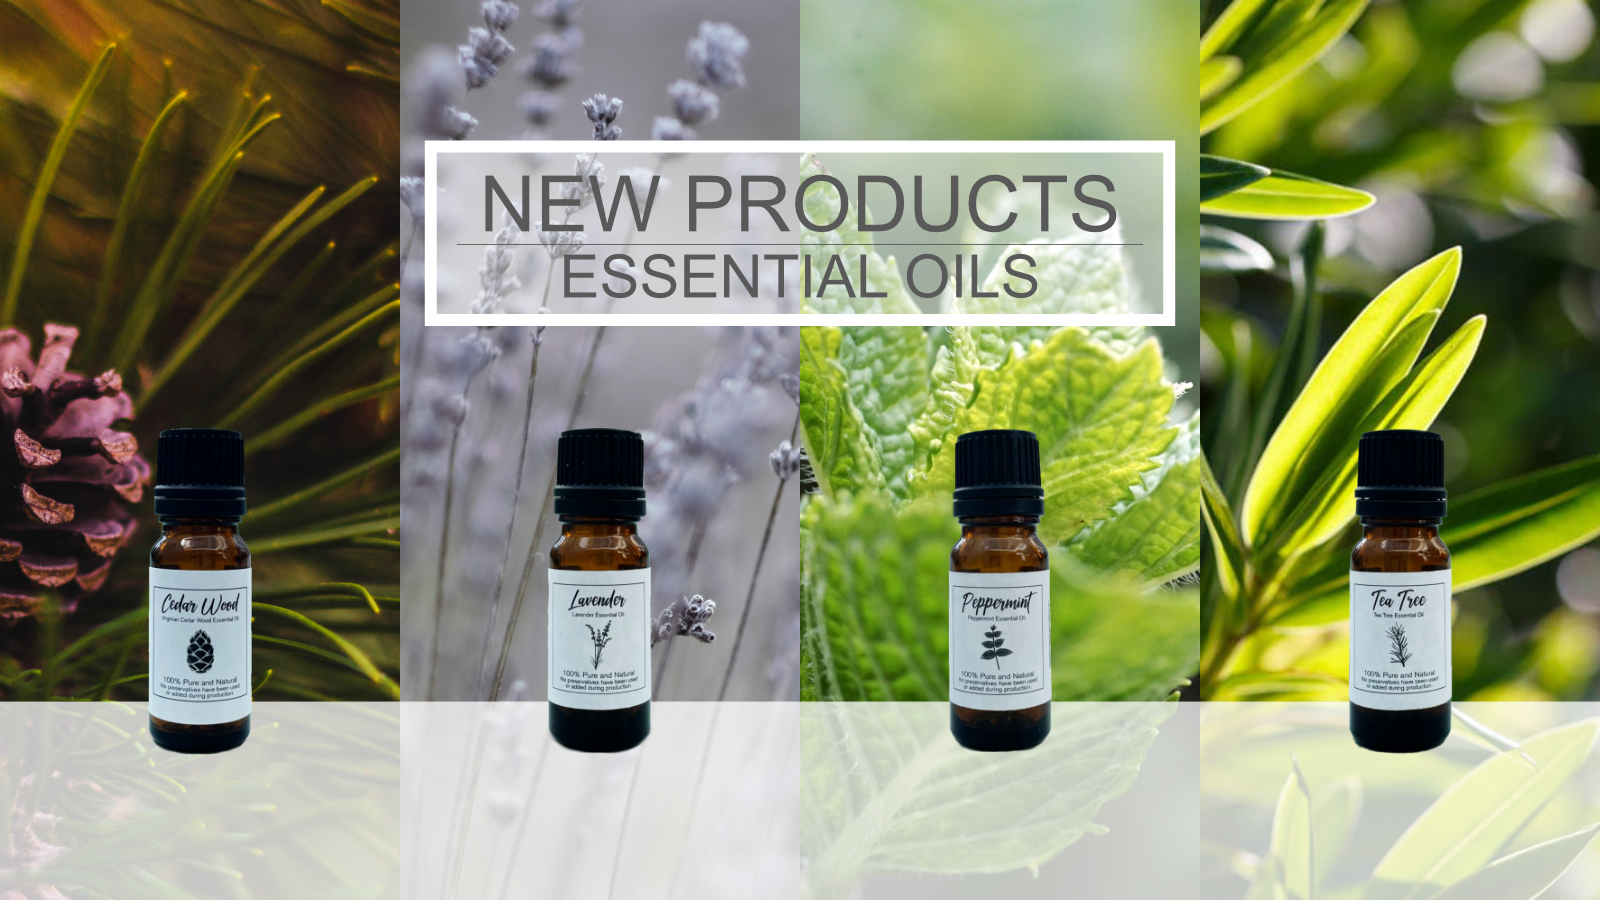 Fill your room with beautiful scents with our new Essential Oils